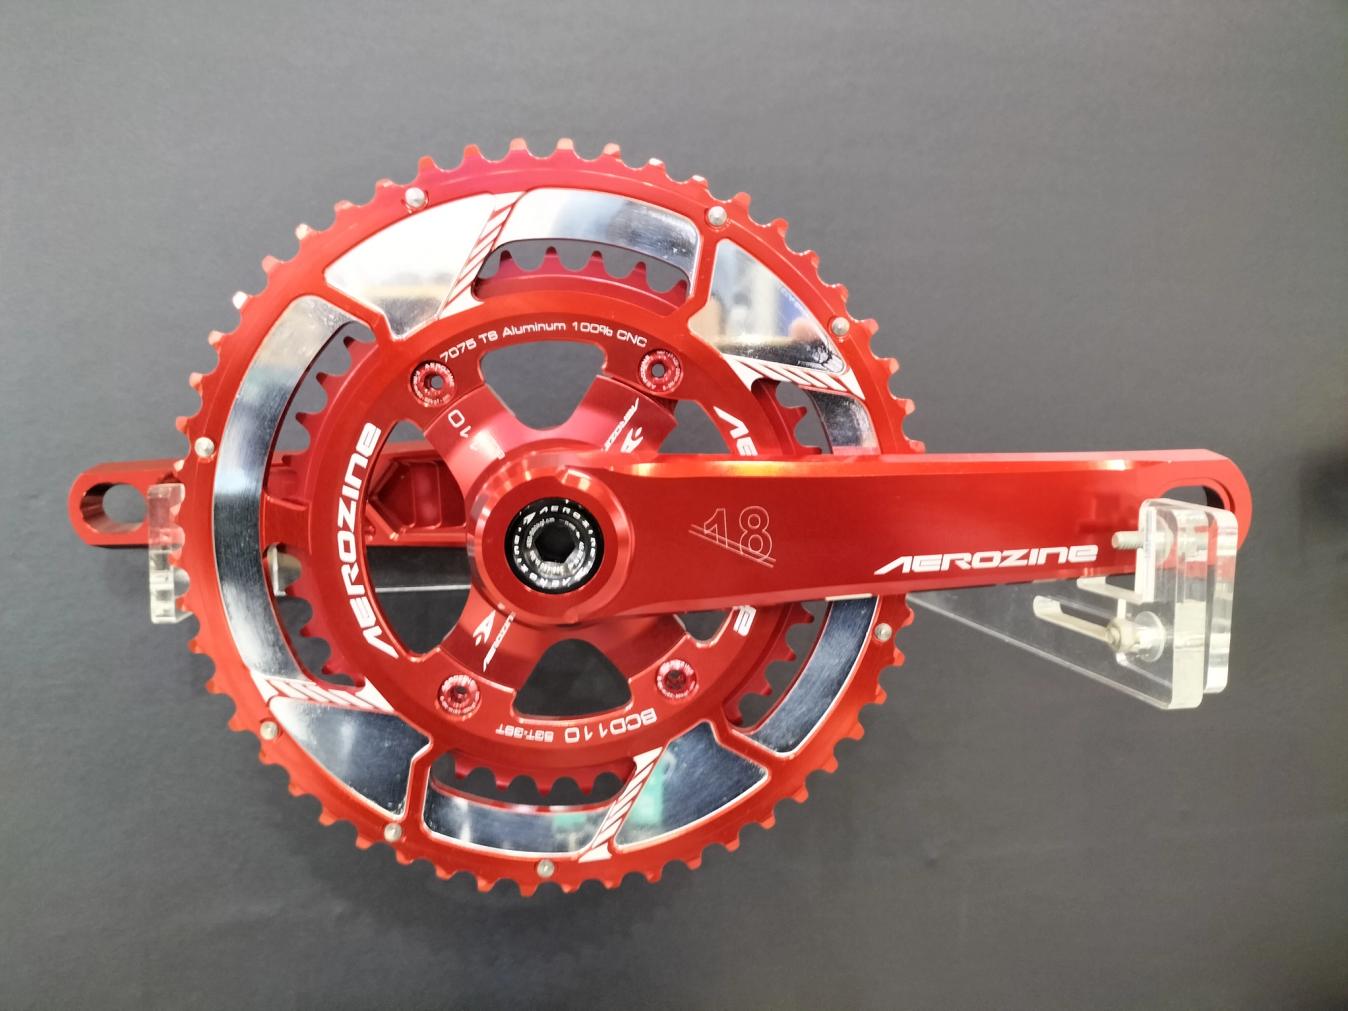 Aerozine has a selection of colourful chainrings